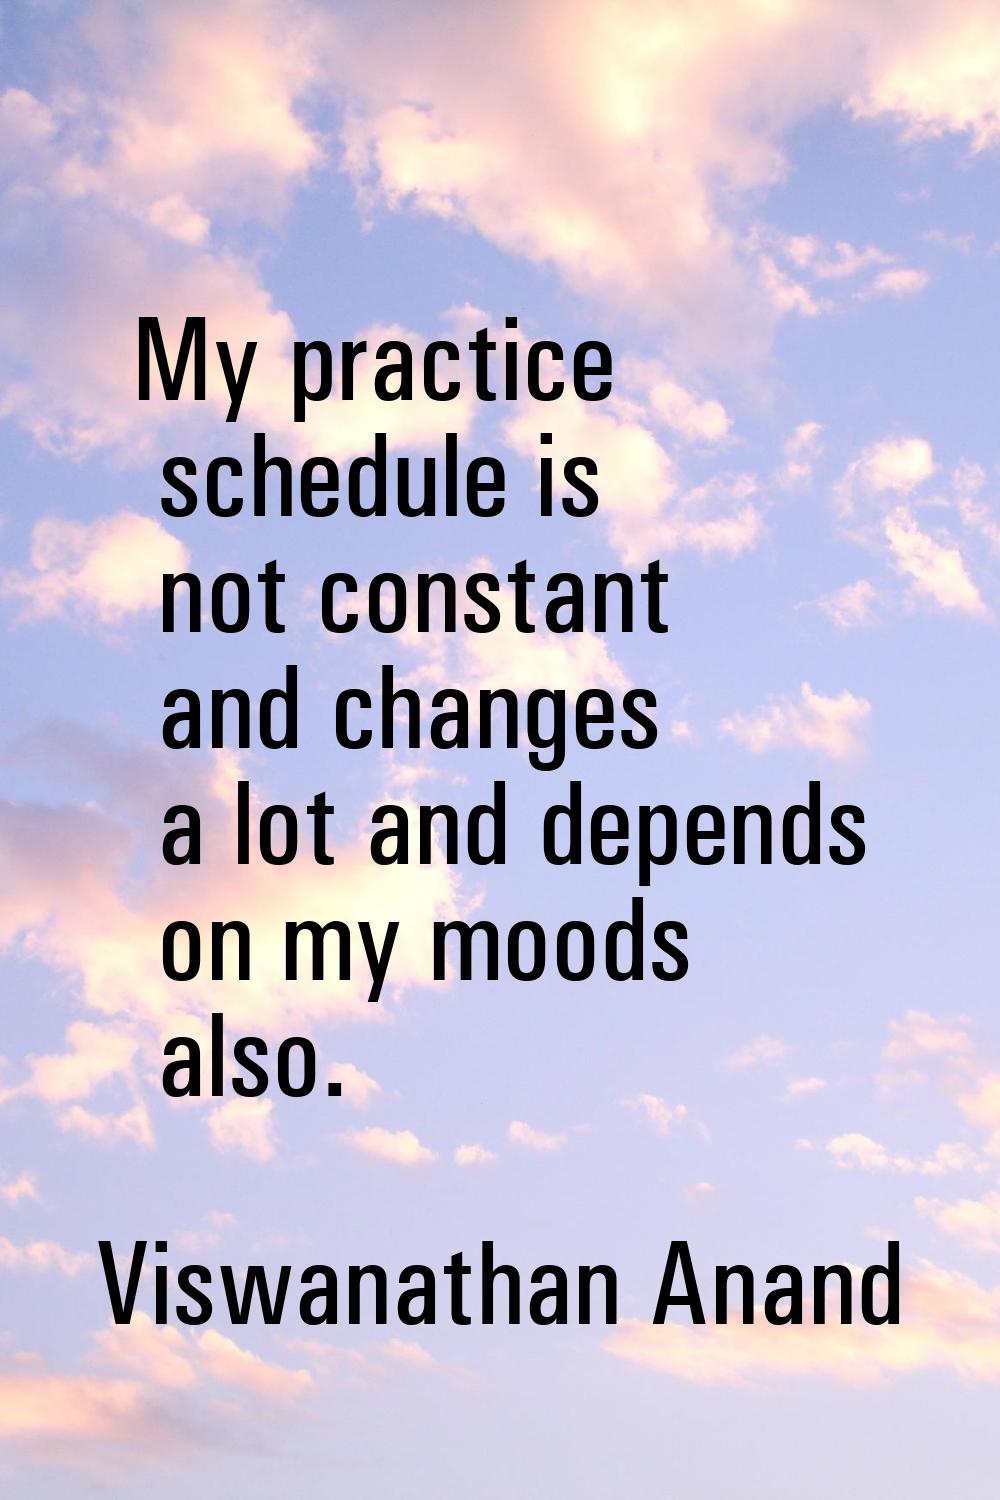 My practice schedule is not constant and changes a lot and depends on my moods also.